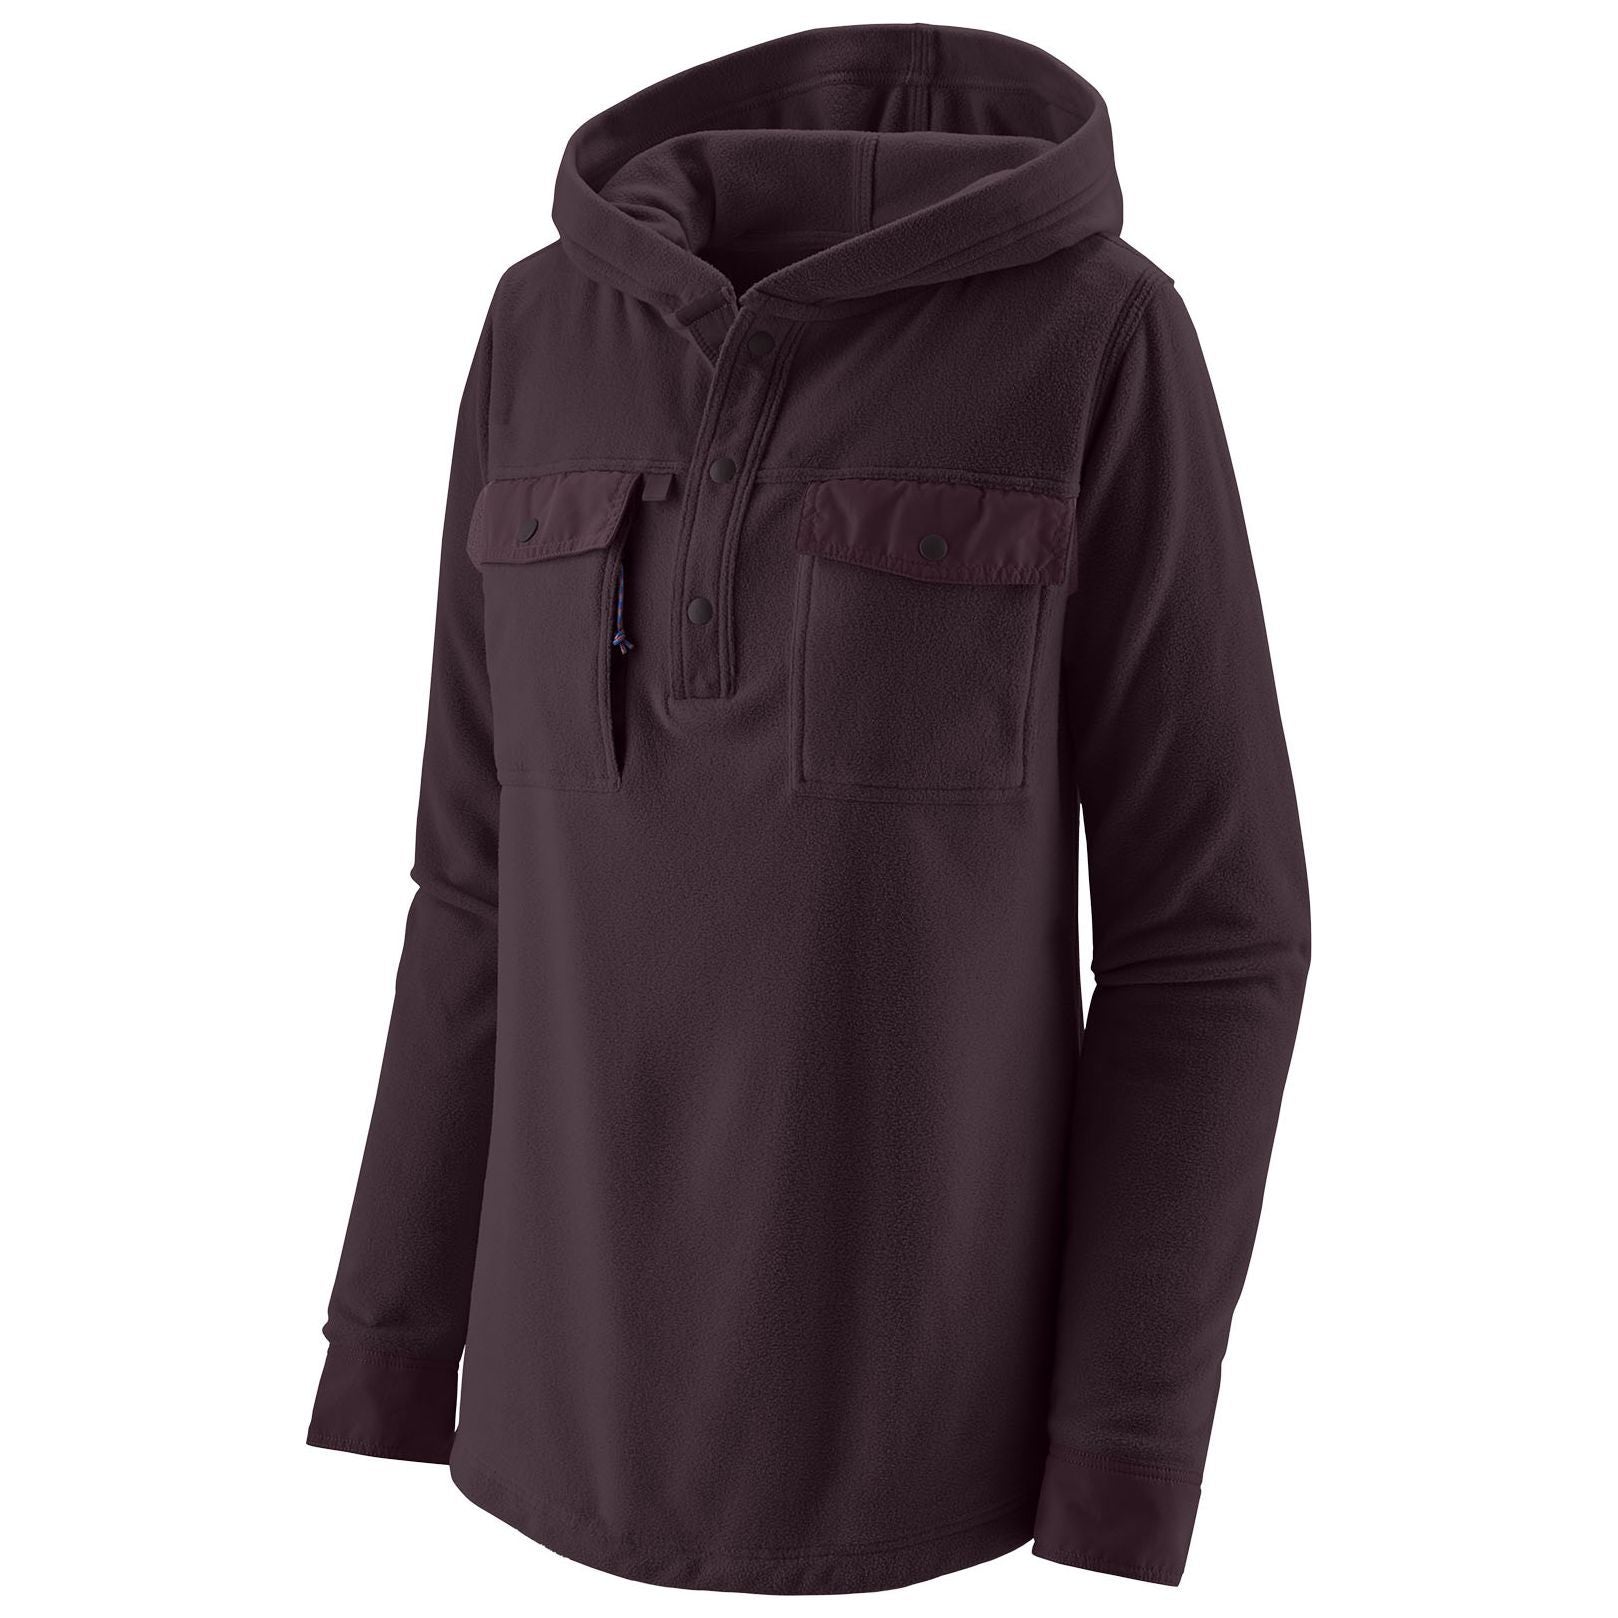 Patagonia Women's Early Rise Shirt LS Obsidian Plum Image 01